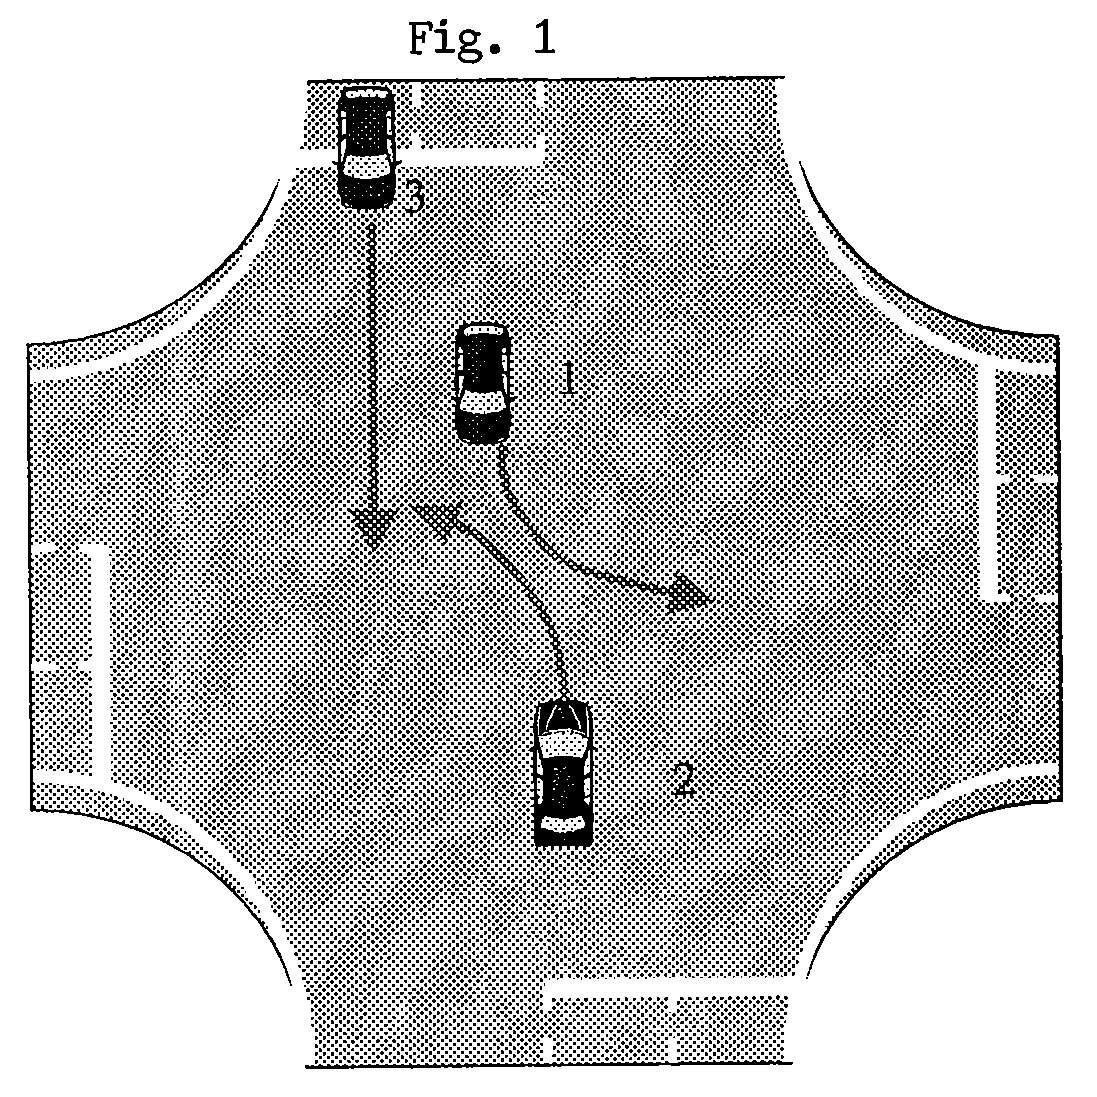 Method and apparatus for identifying concealed objects in road traffic